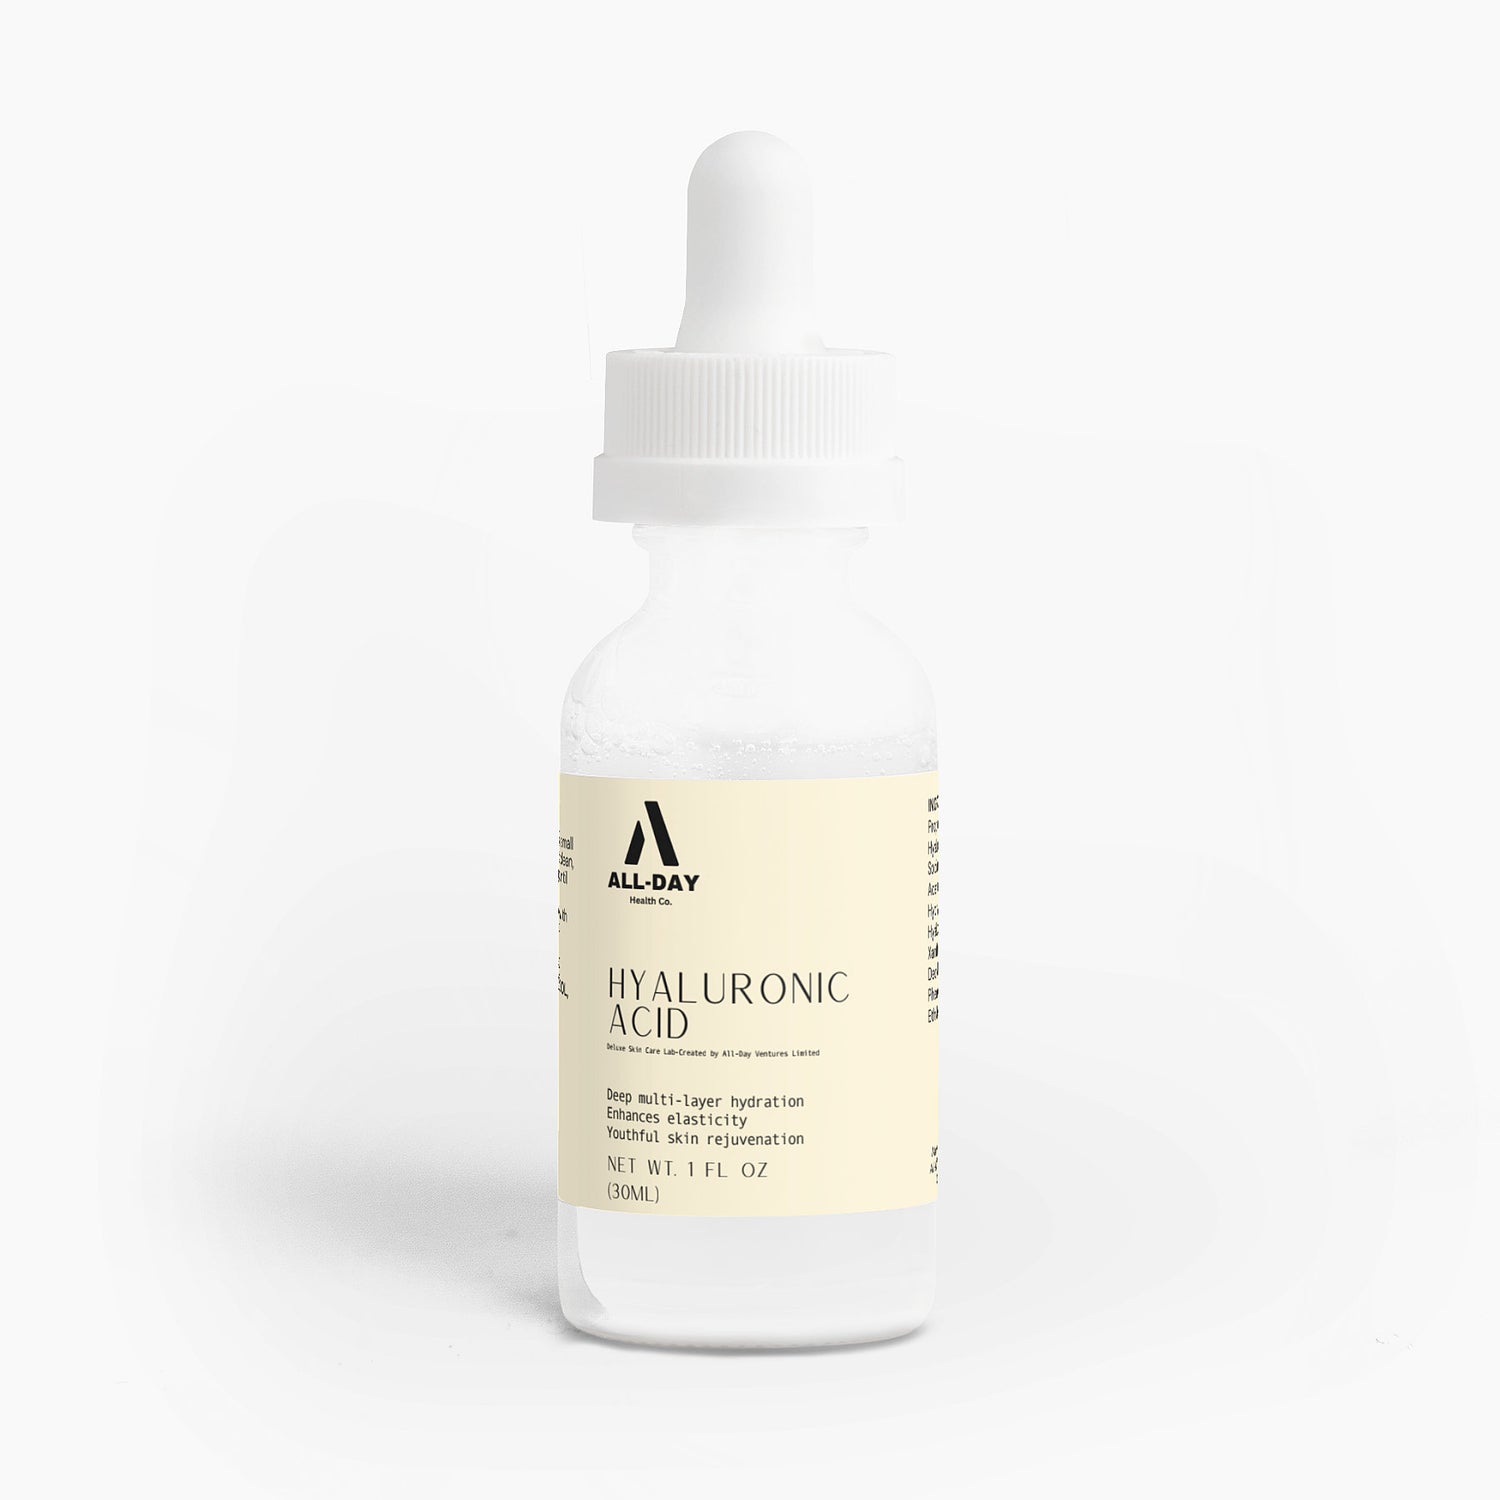 Hyaluronic Acid Serum - ALL-DAY Health Co.